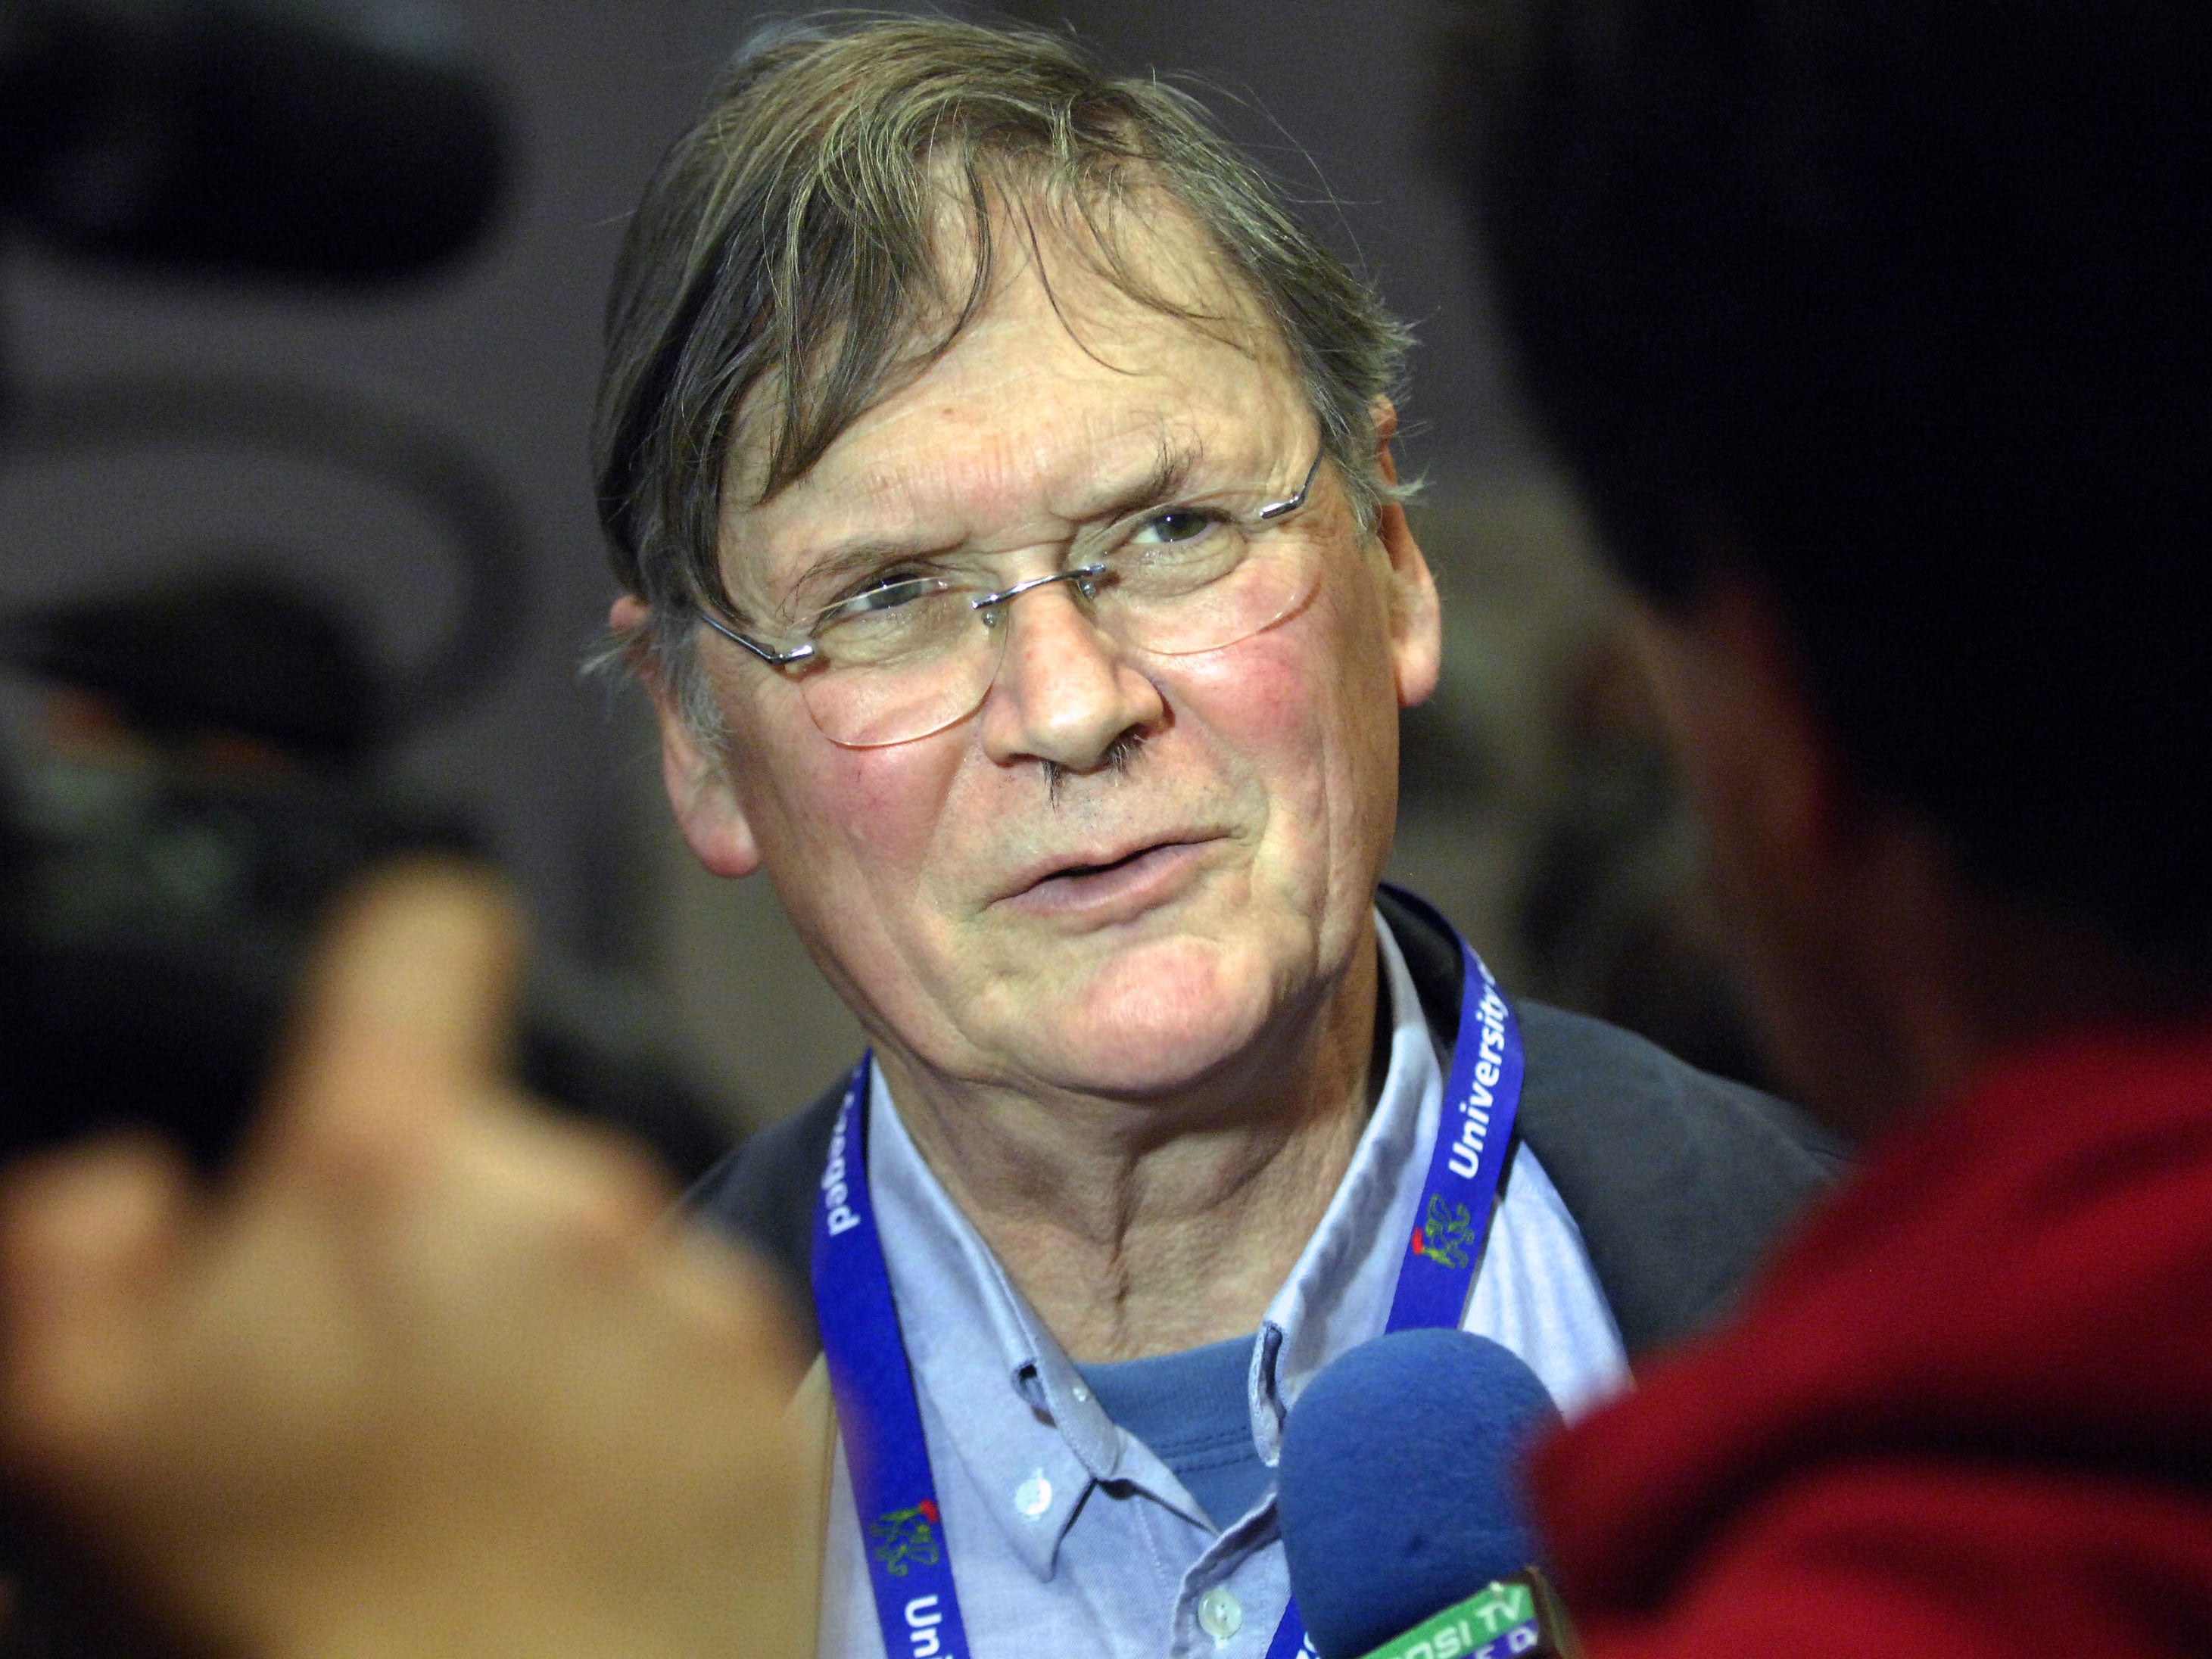 Sir Tim Hunt said made sexist remarks about women in science at a science journalist conference in South Korea.